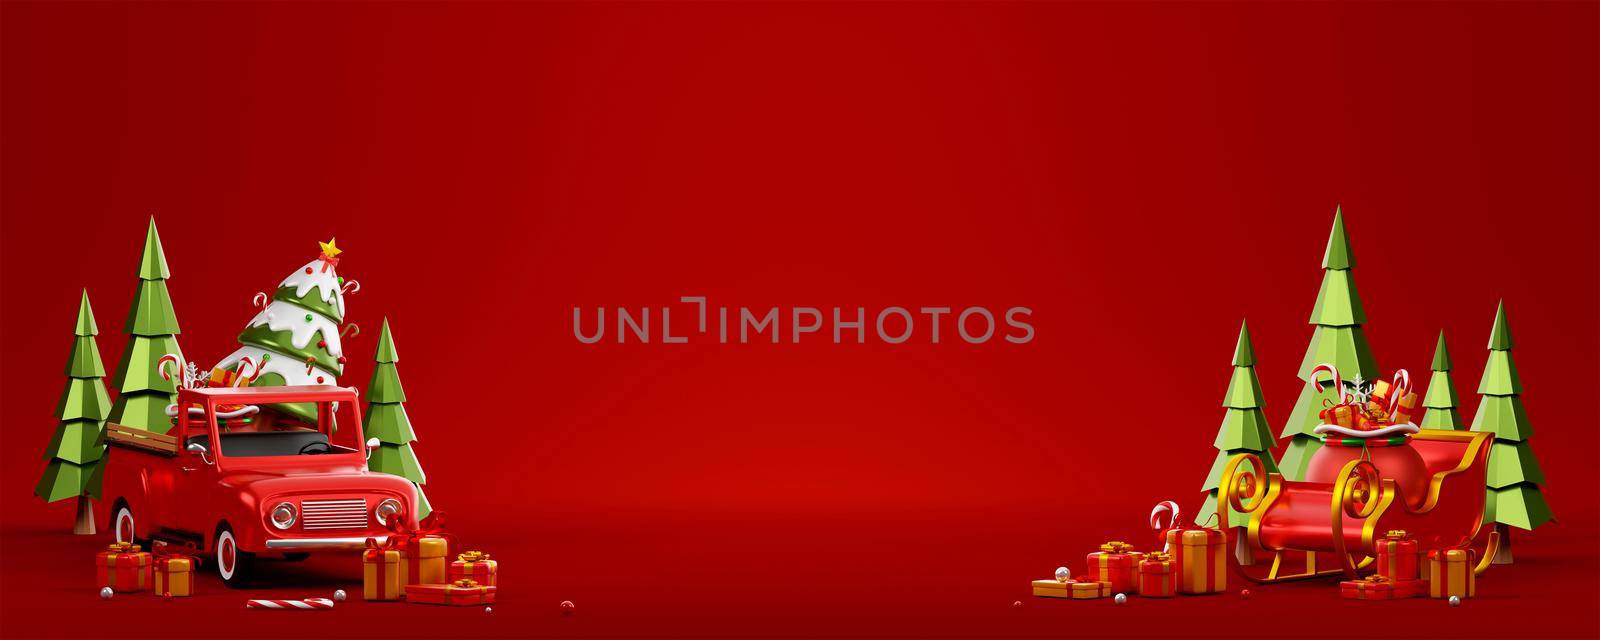 3d illustration Christmas banner of  Christmas truck and sleigh on red background by nutzchotwarut